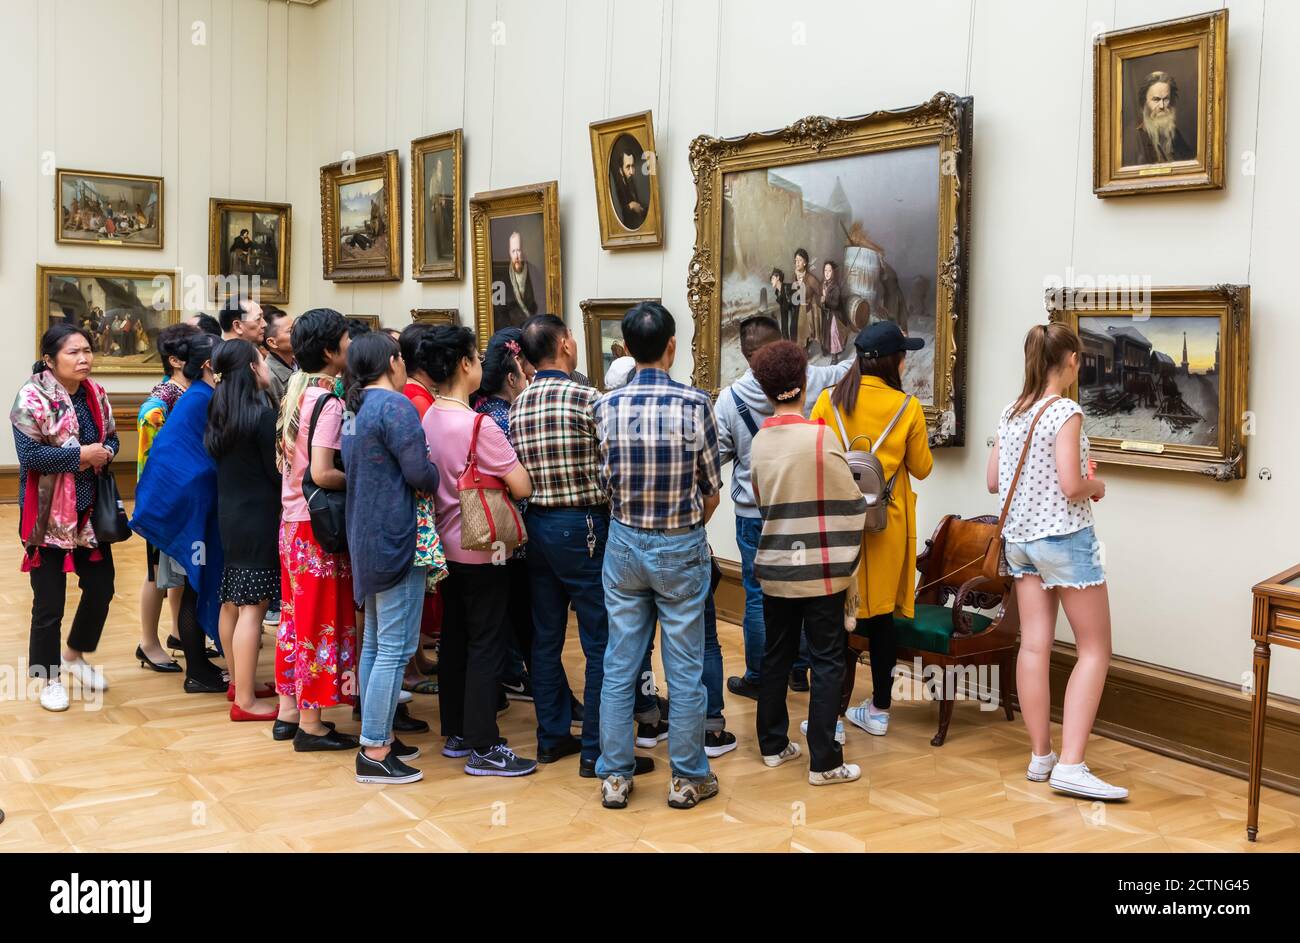 Moscow, Russia – July 1, 2017. A group of tourists in front of Troika painting by Russian painter Perov, at the Tretyakov Gallery in Moscow. Stock Photo